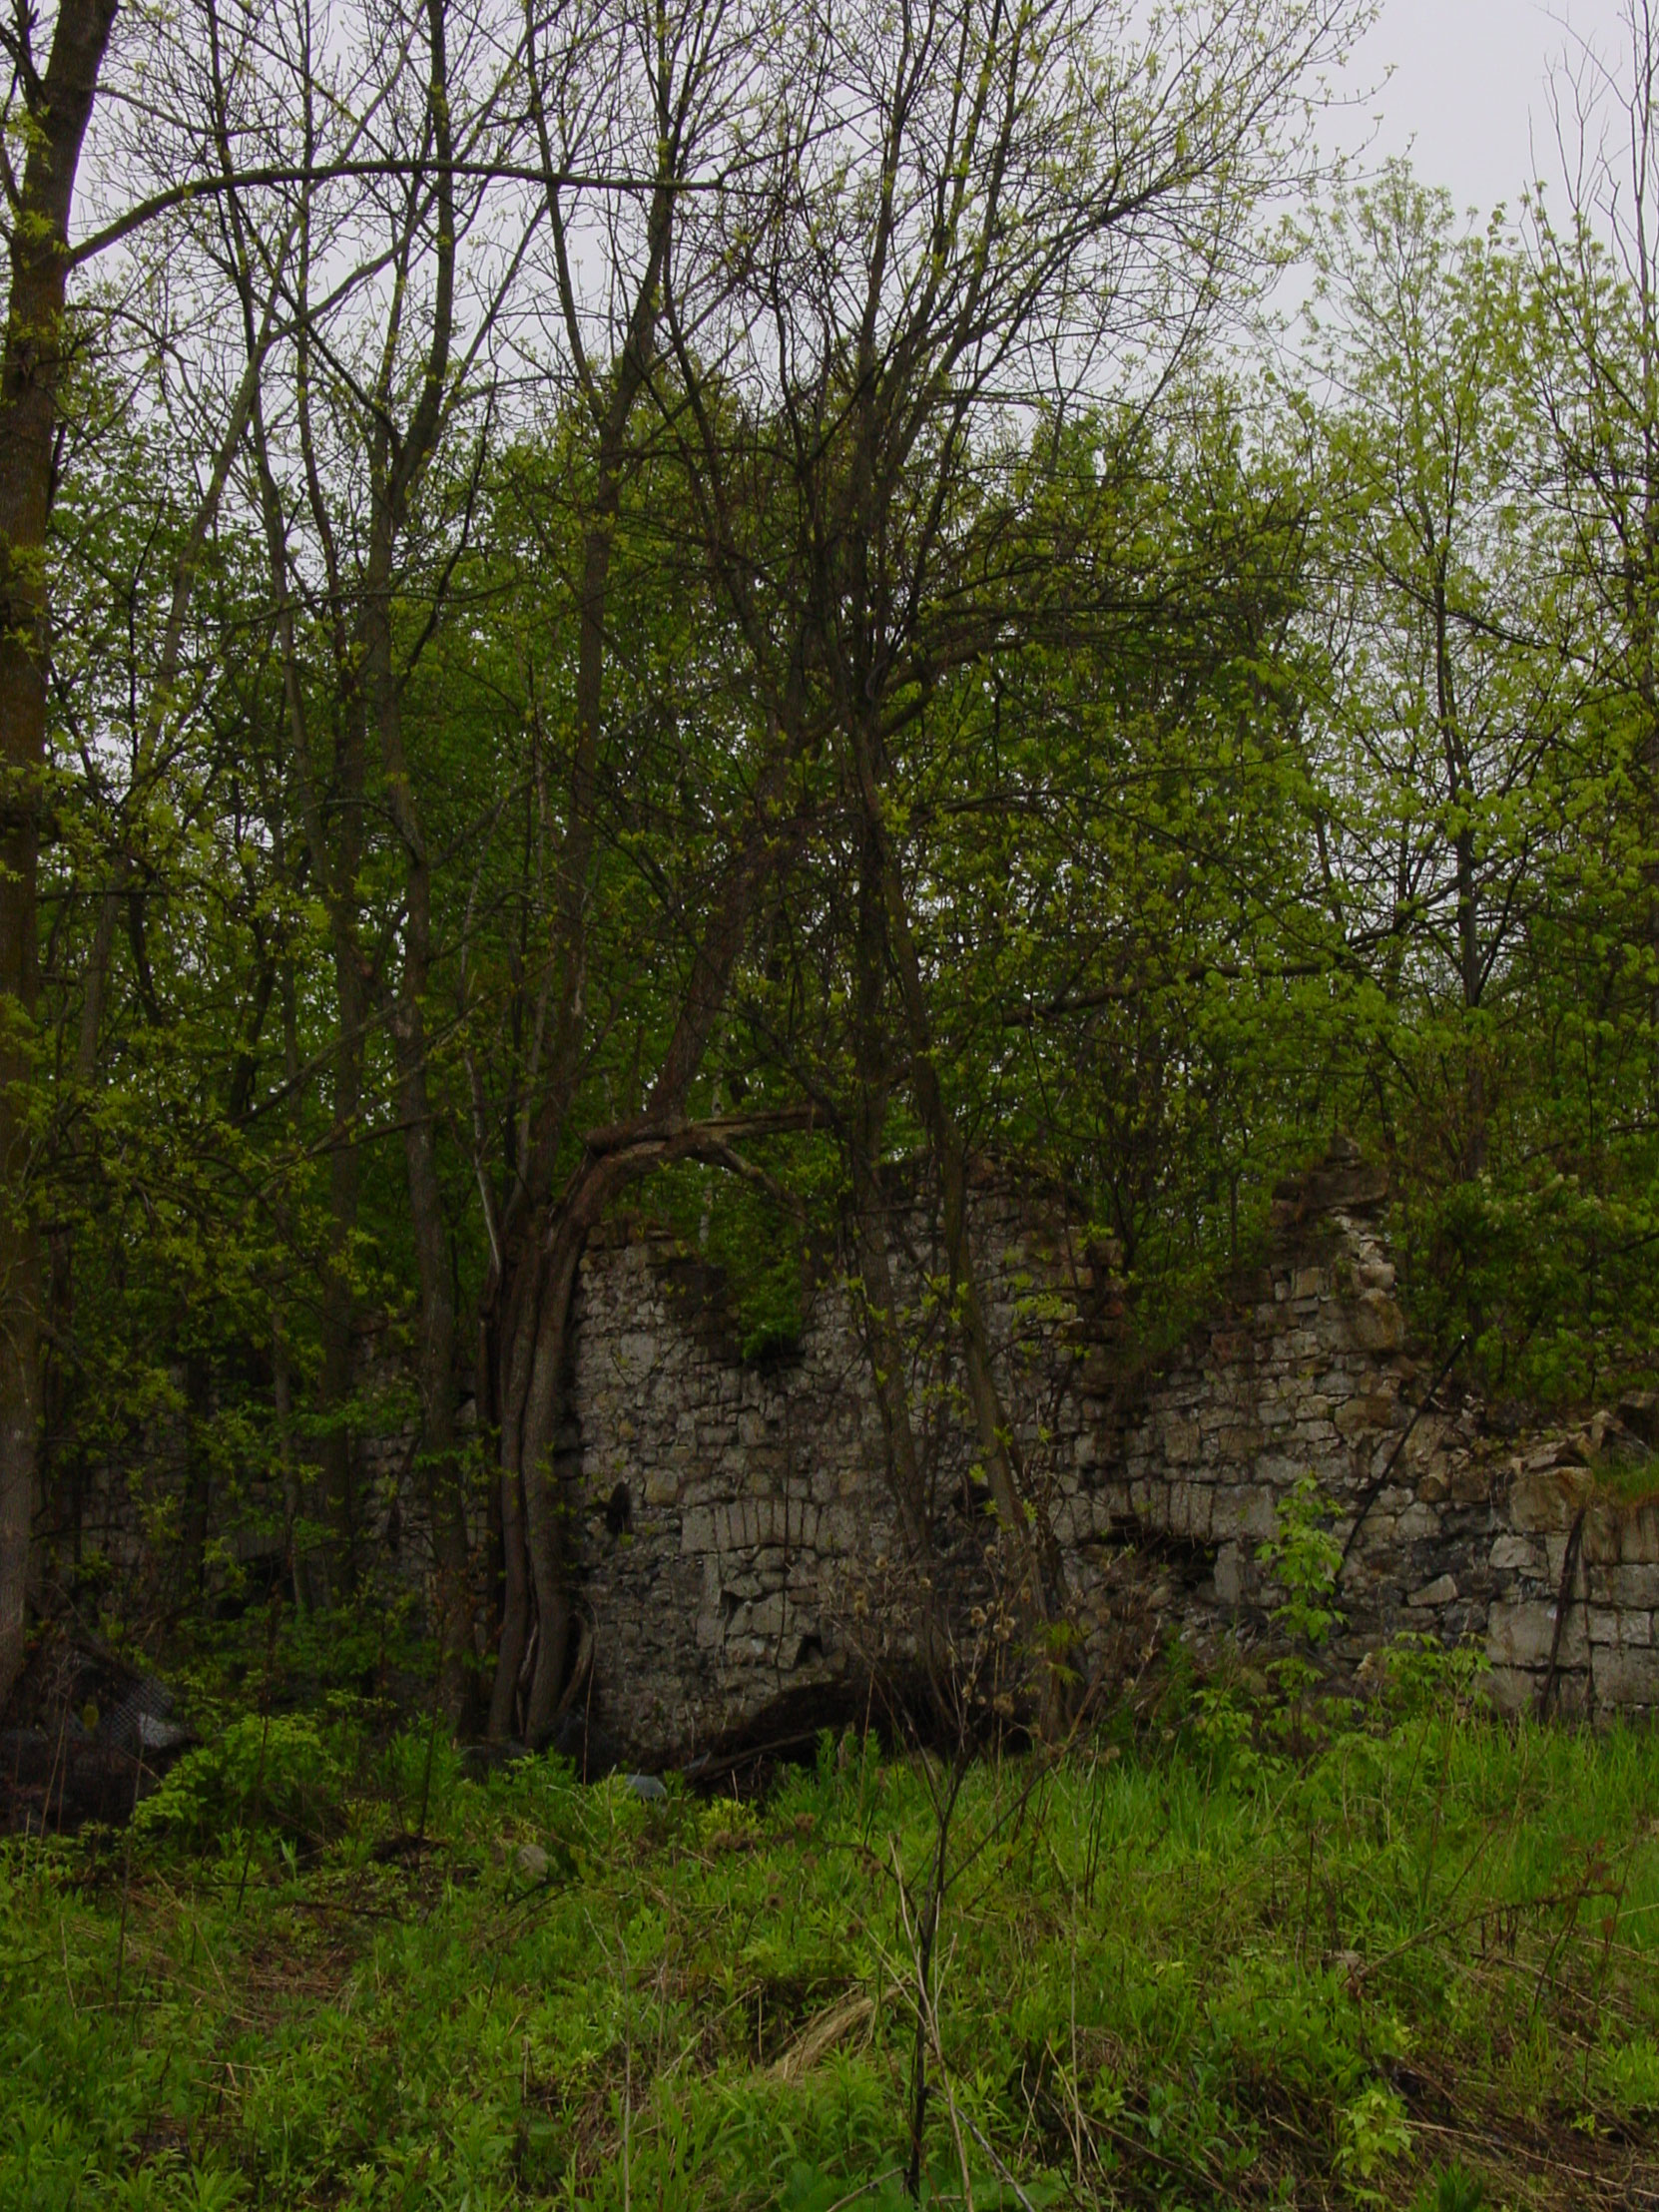 Ruins of the Owen Sound Portland Cement Company factory, Shallow Lake, Ontario, 2003 (photo by author)